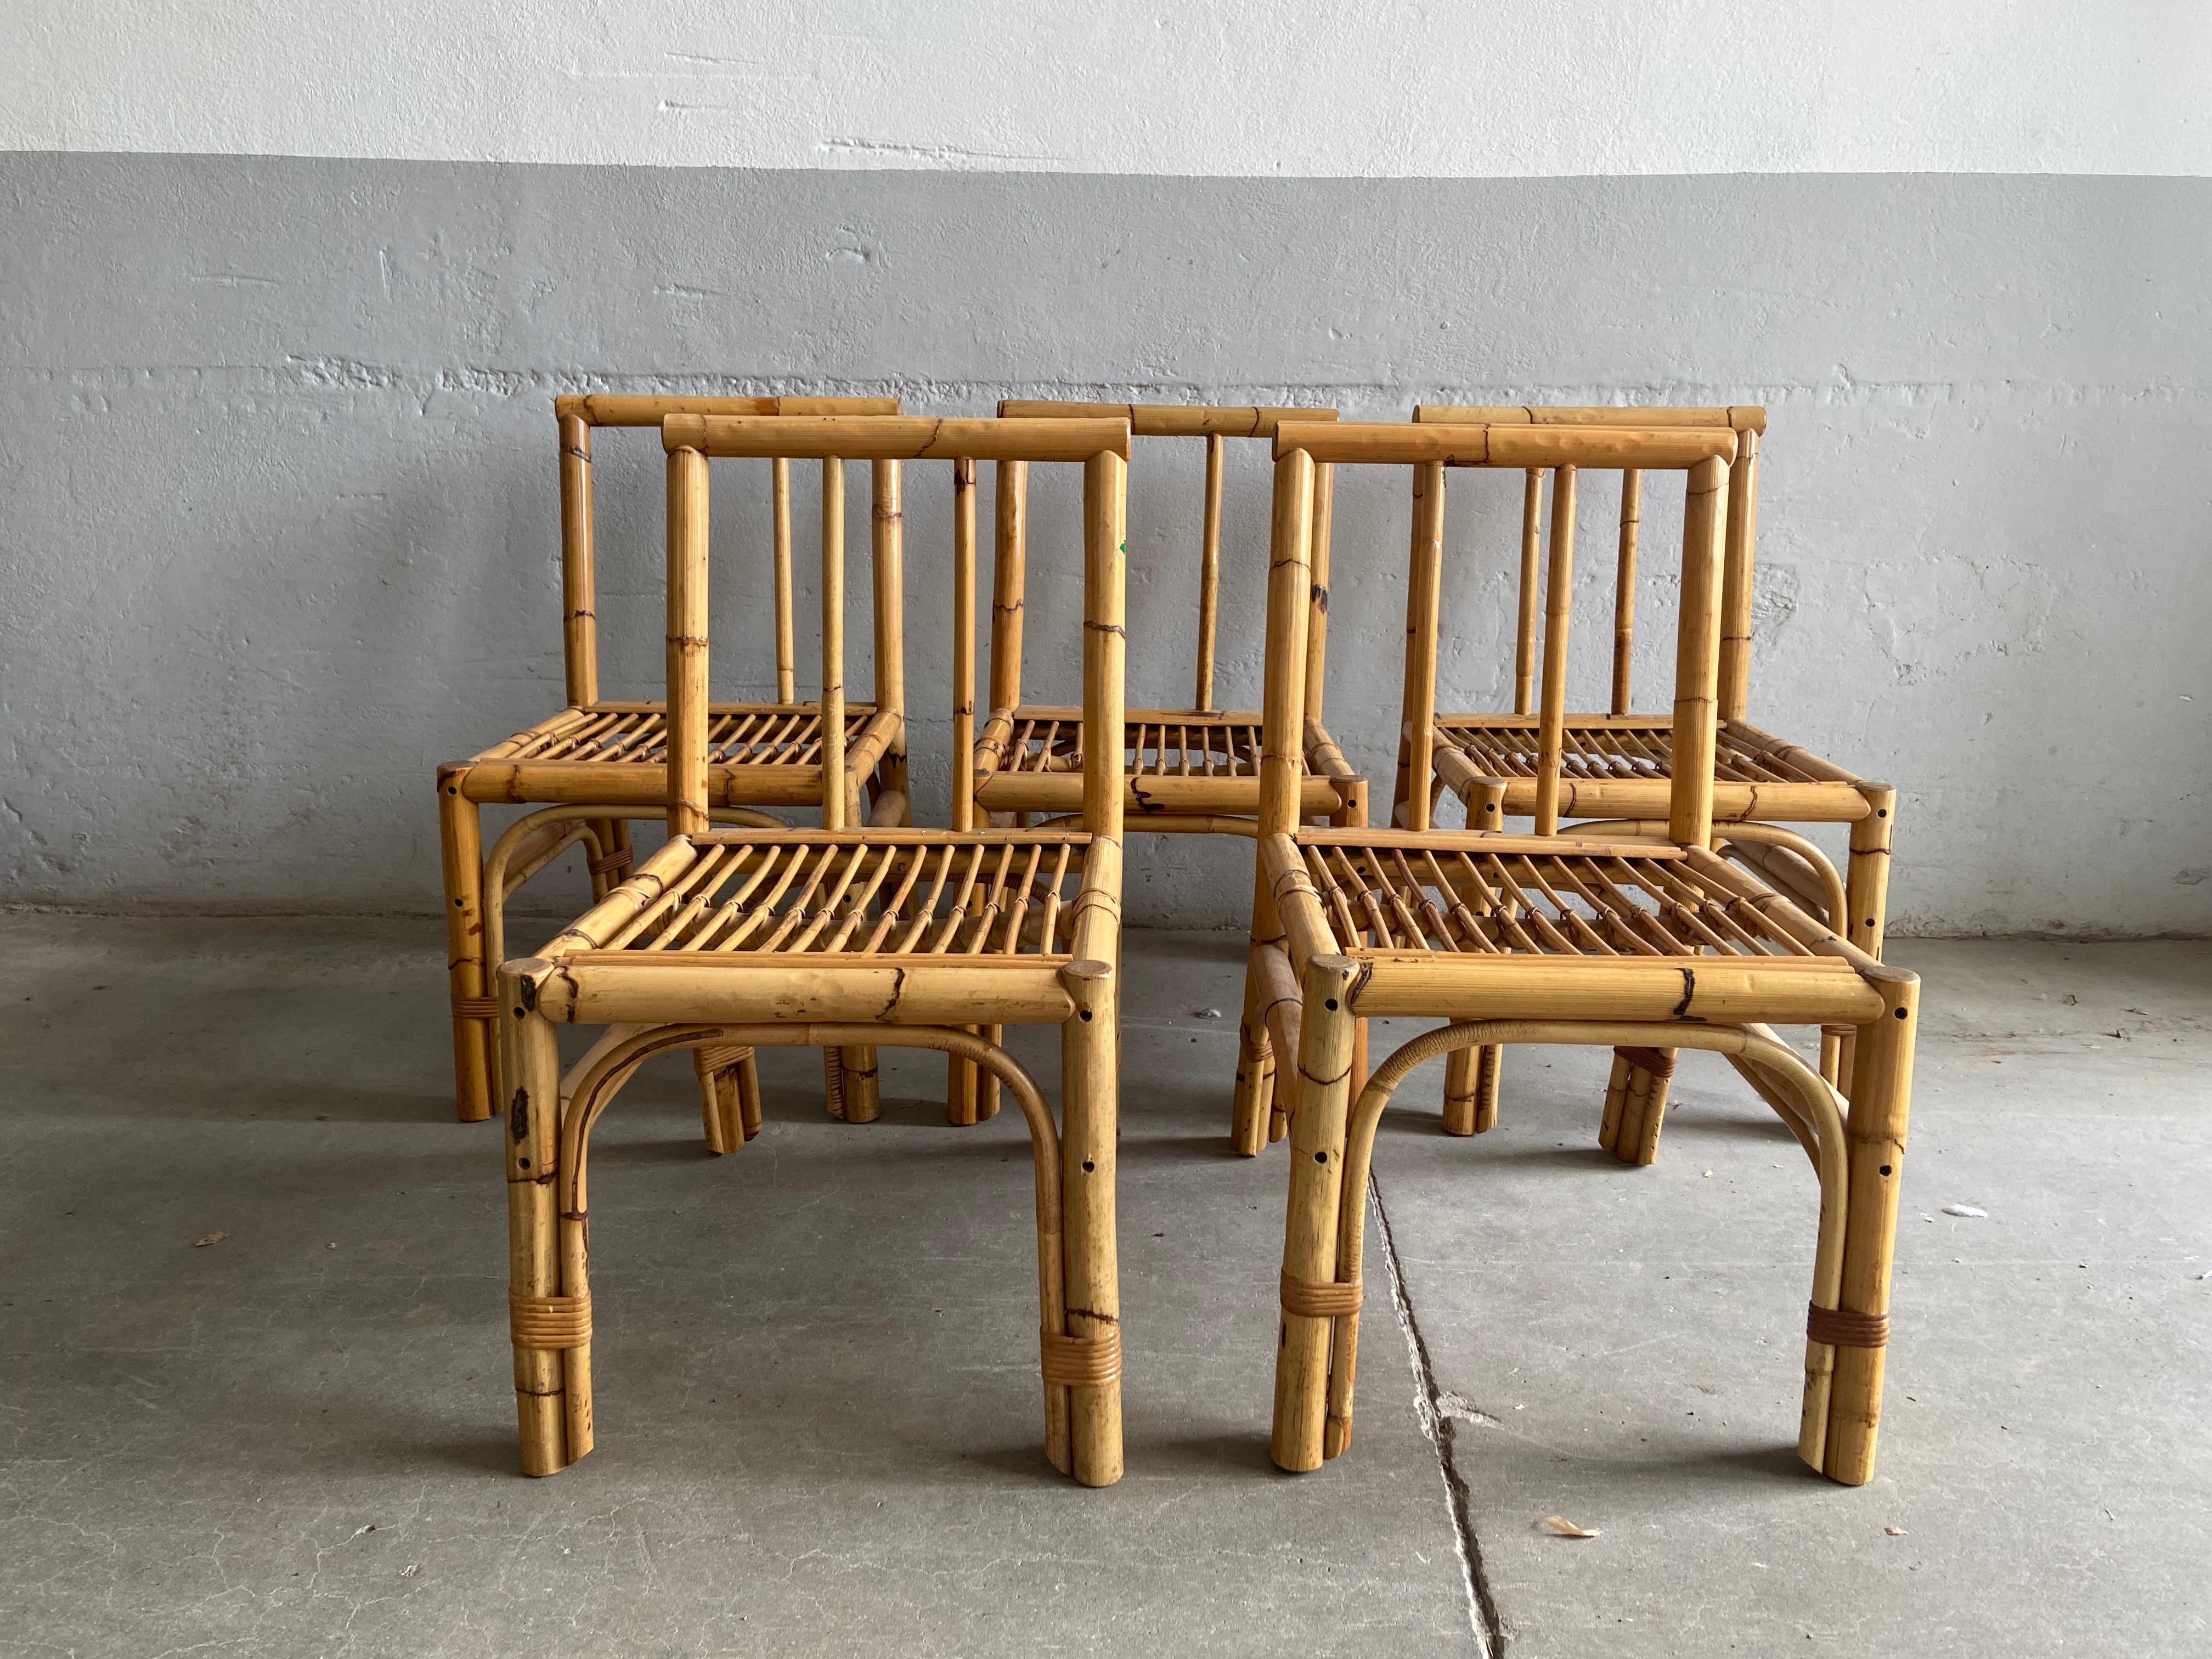 Mid-Century Modern Italian set of 5 bamboo and rattan dining chairs. 1970s
All the chairs are in really good vintage conditions. In one of the chairs, one of the seat slats is damaged, but this does not affect the stability of the structure and the